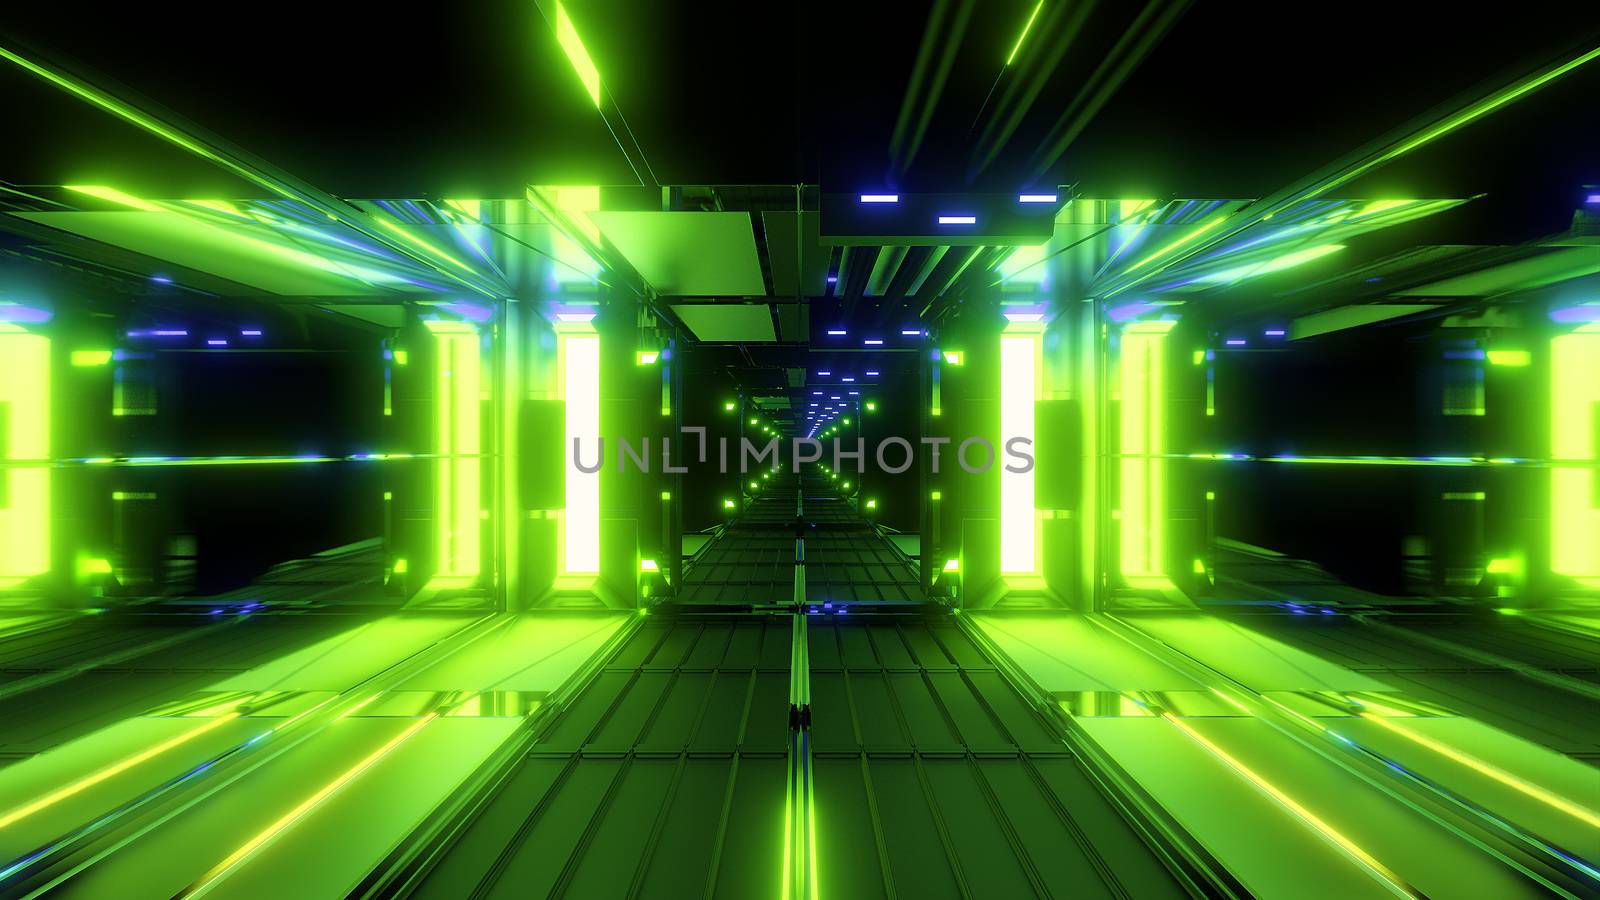 nice glowing space tunnel background wallpaper 3d rendering, modern futur airship corridor background